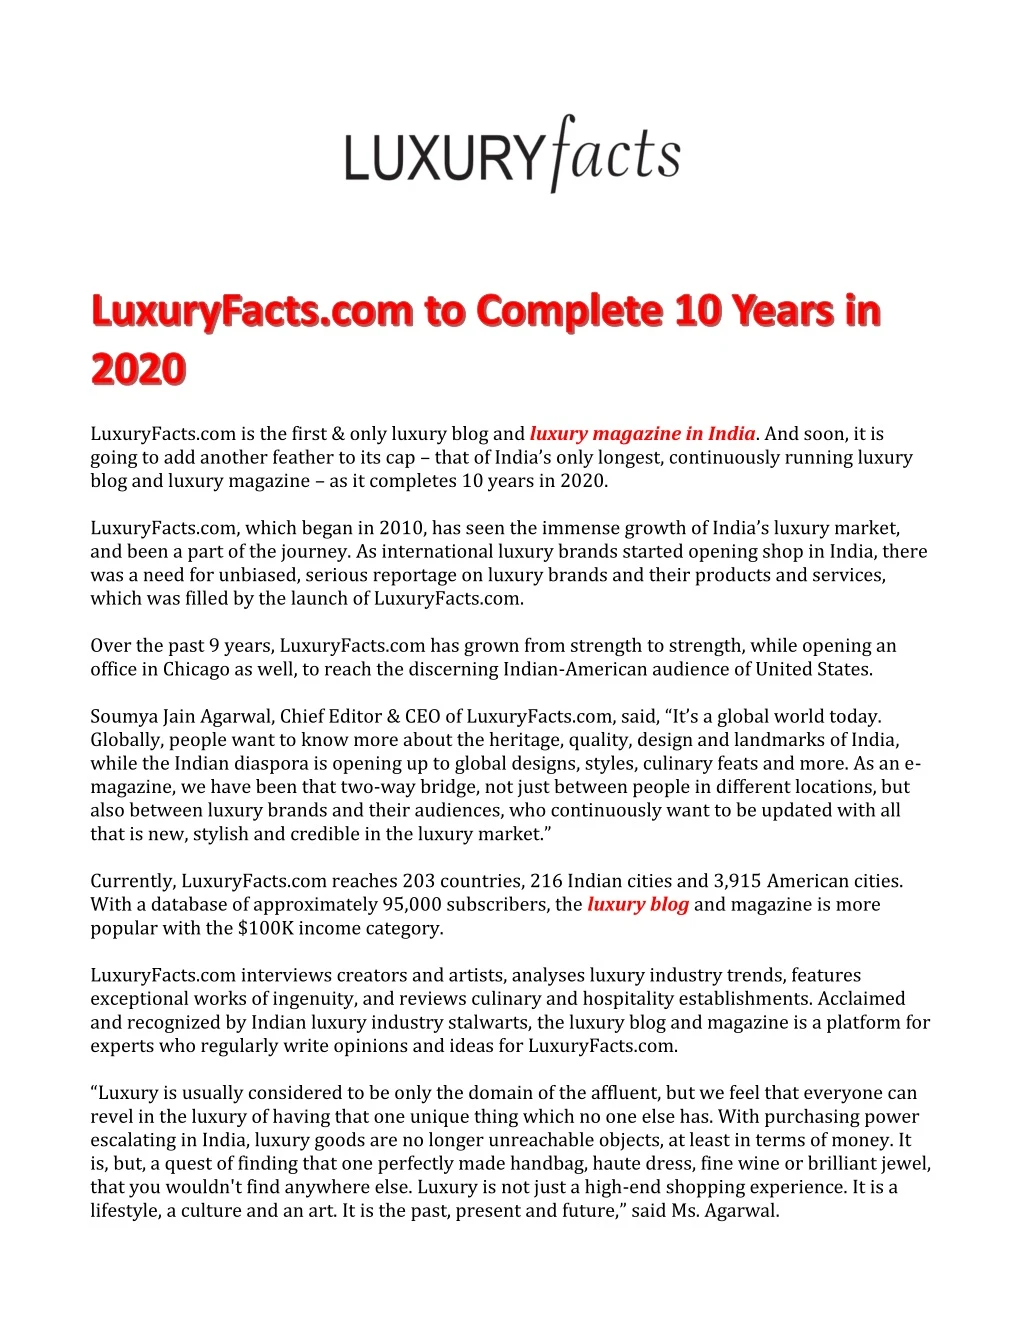 luxuryfacts com is the first only luxury blog